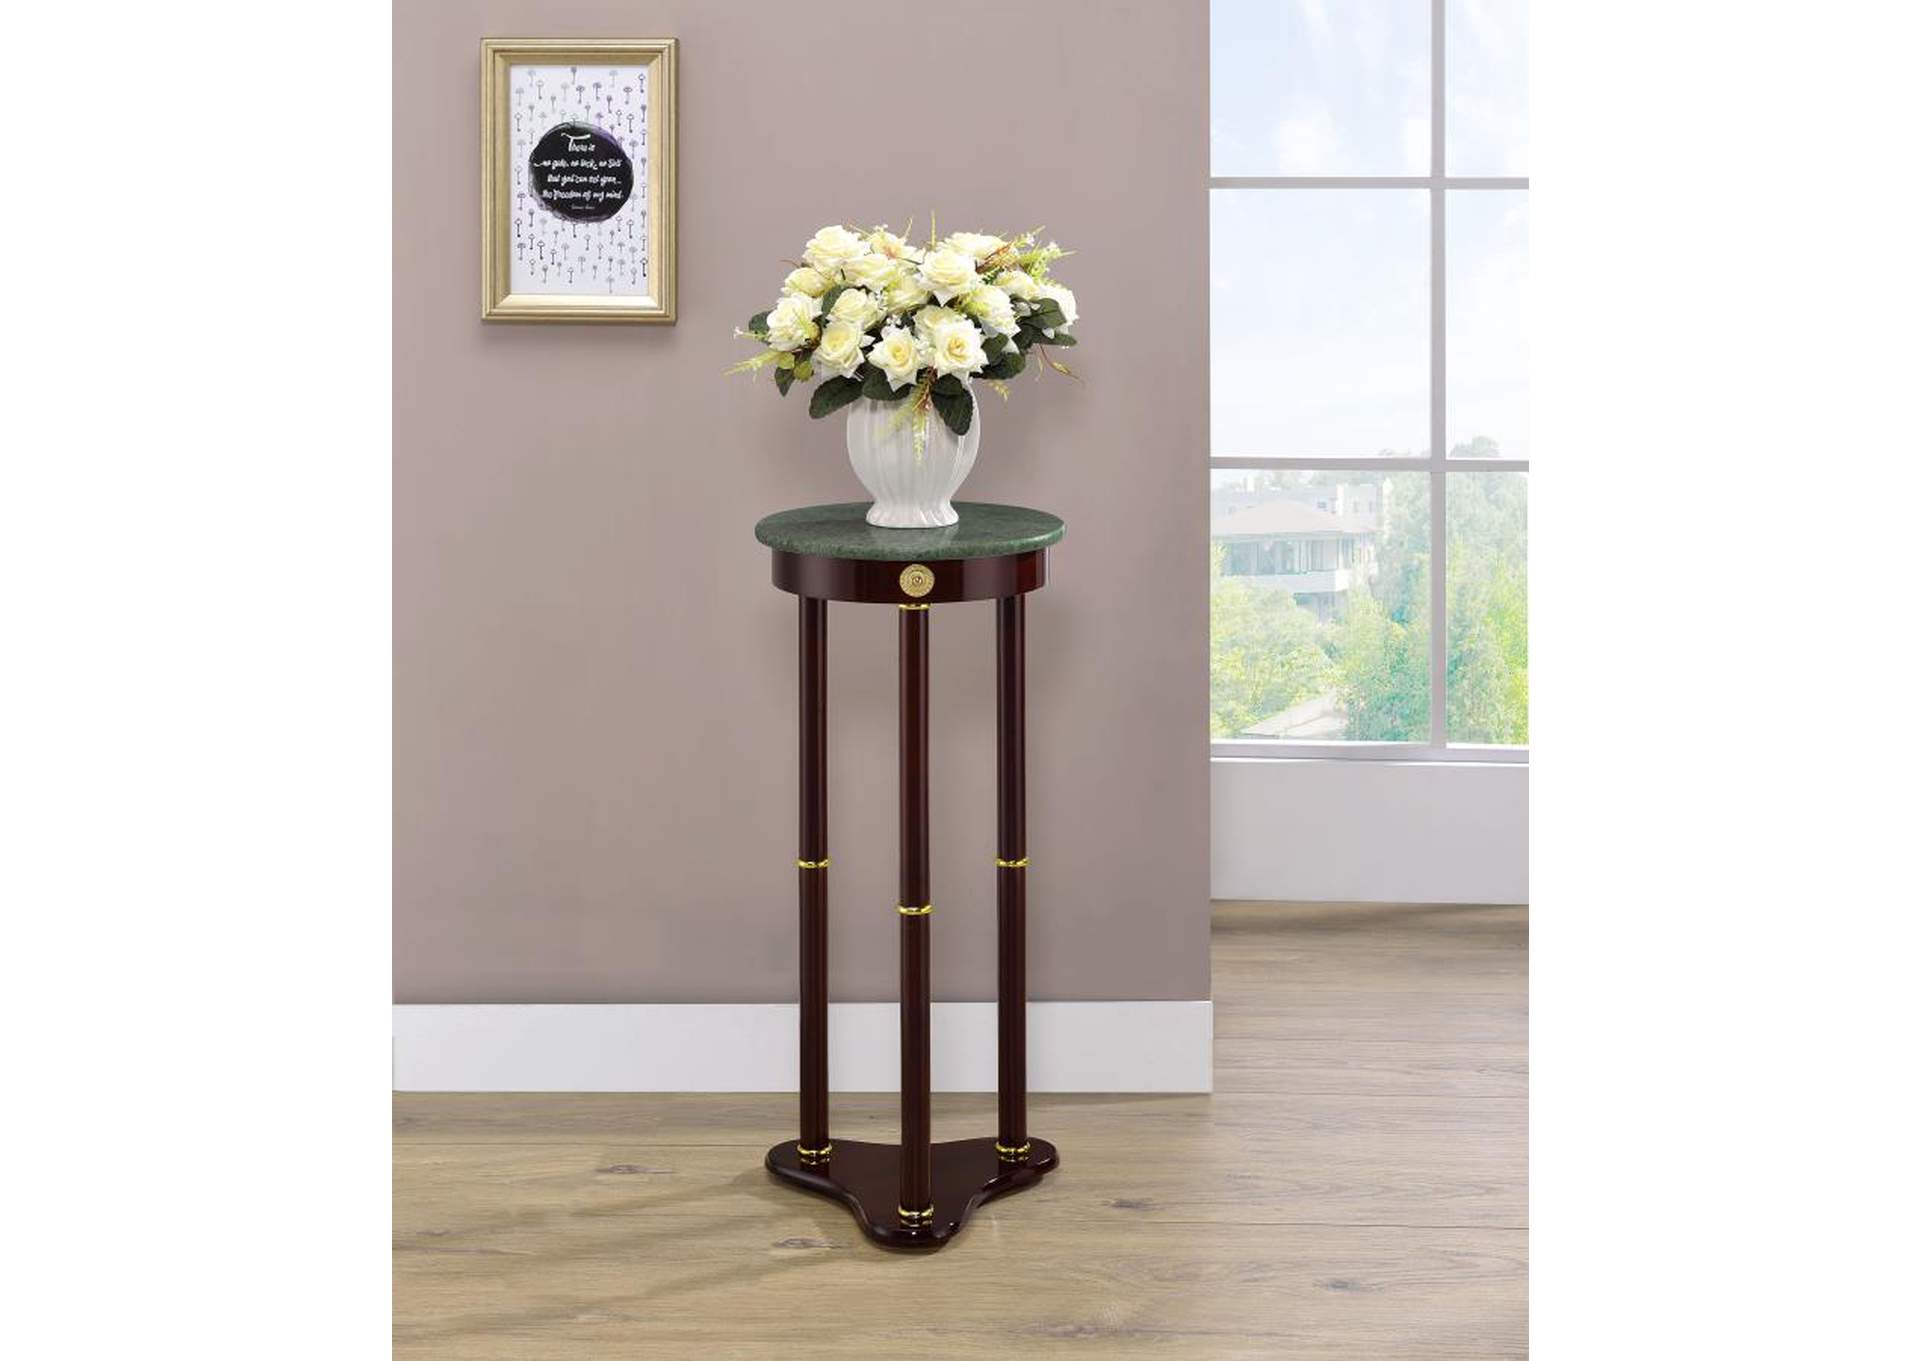 Edie Round Marble Top Accent Table Merlot,Coaster Furniture